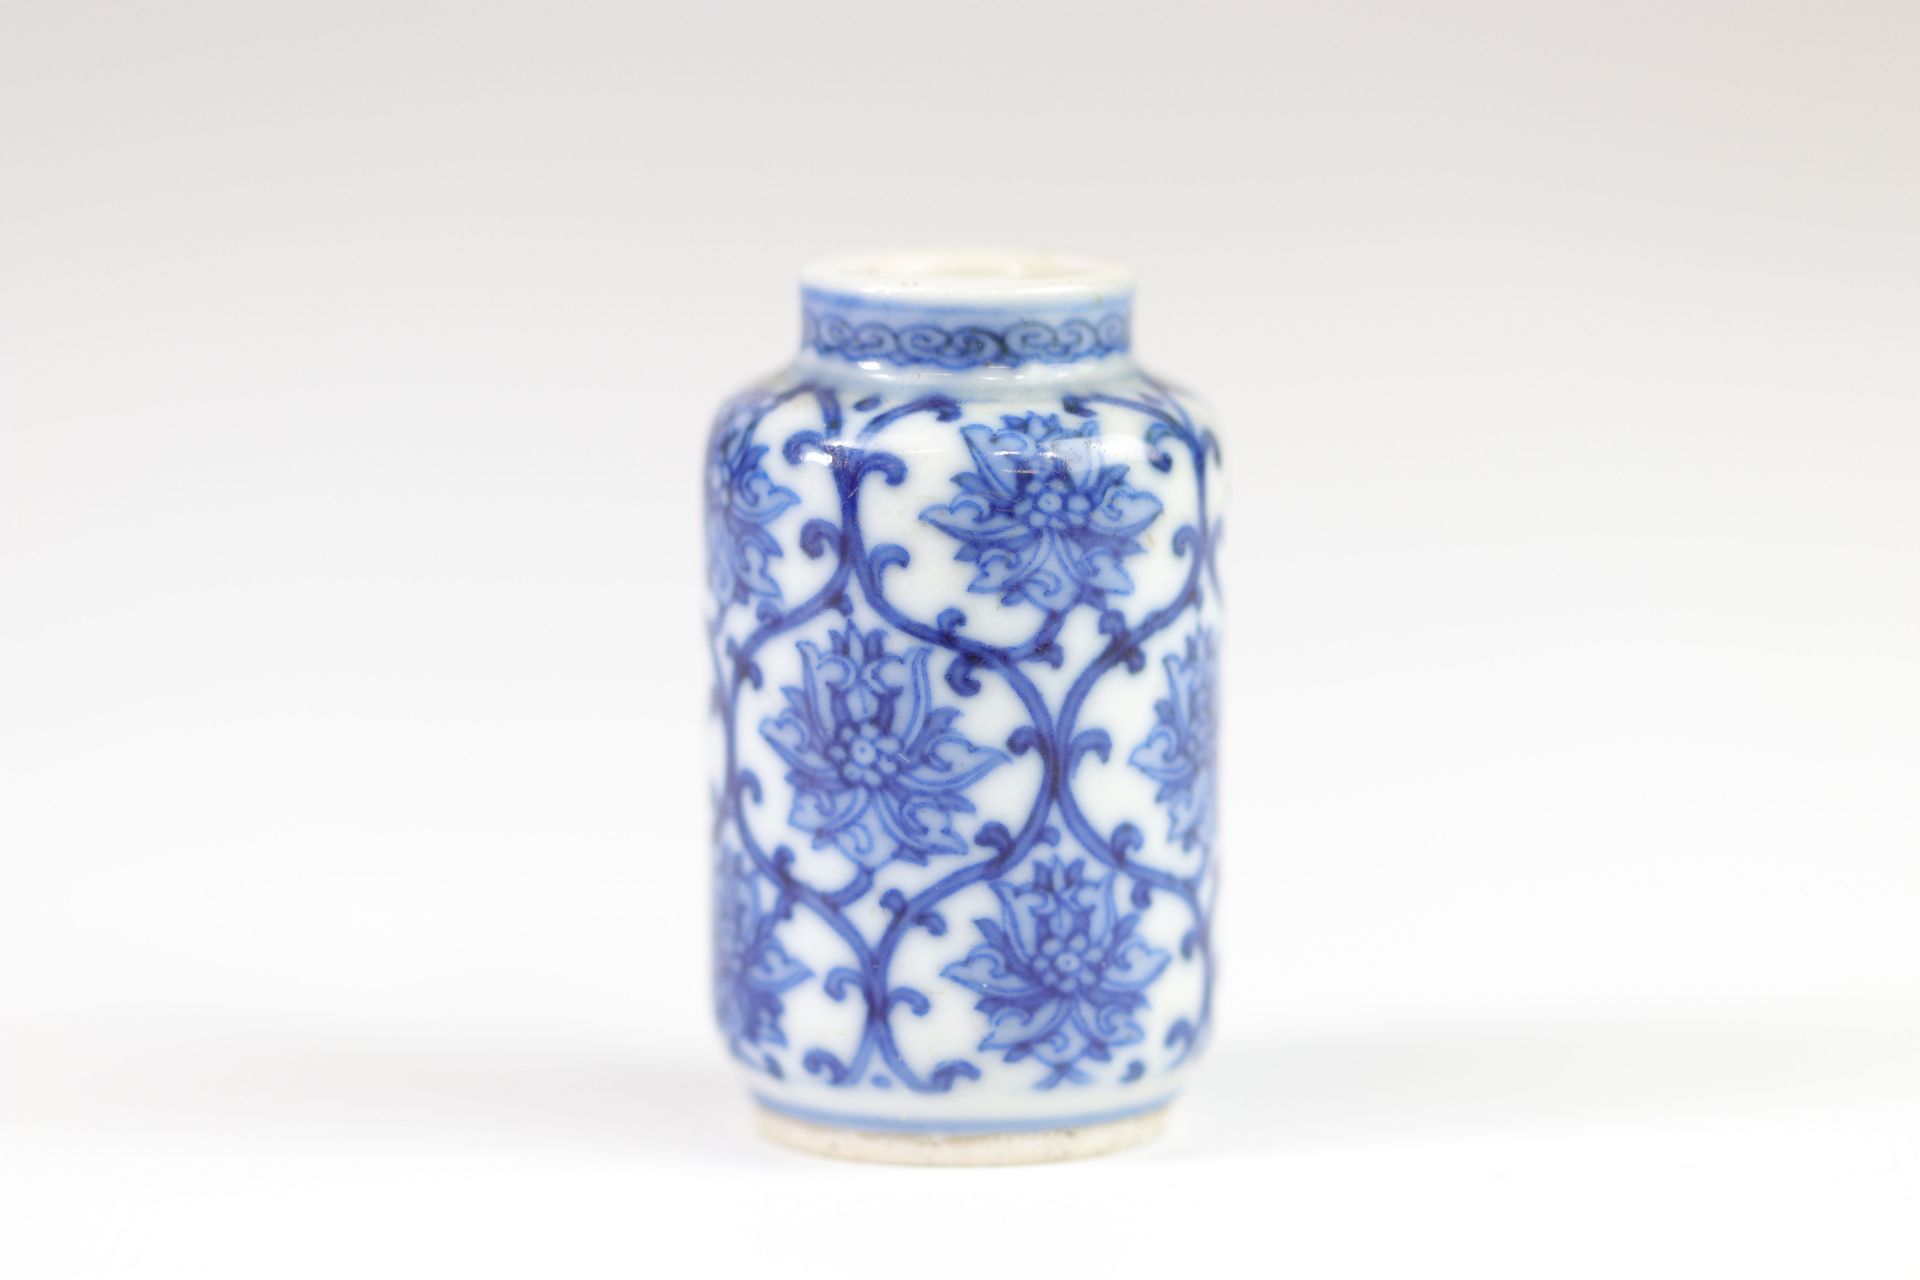 China blanc-bleu porcelain snuff box with floral decoration brand under the piece - Image 3 of 5